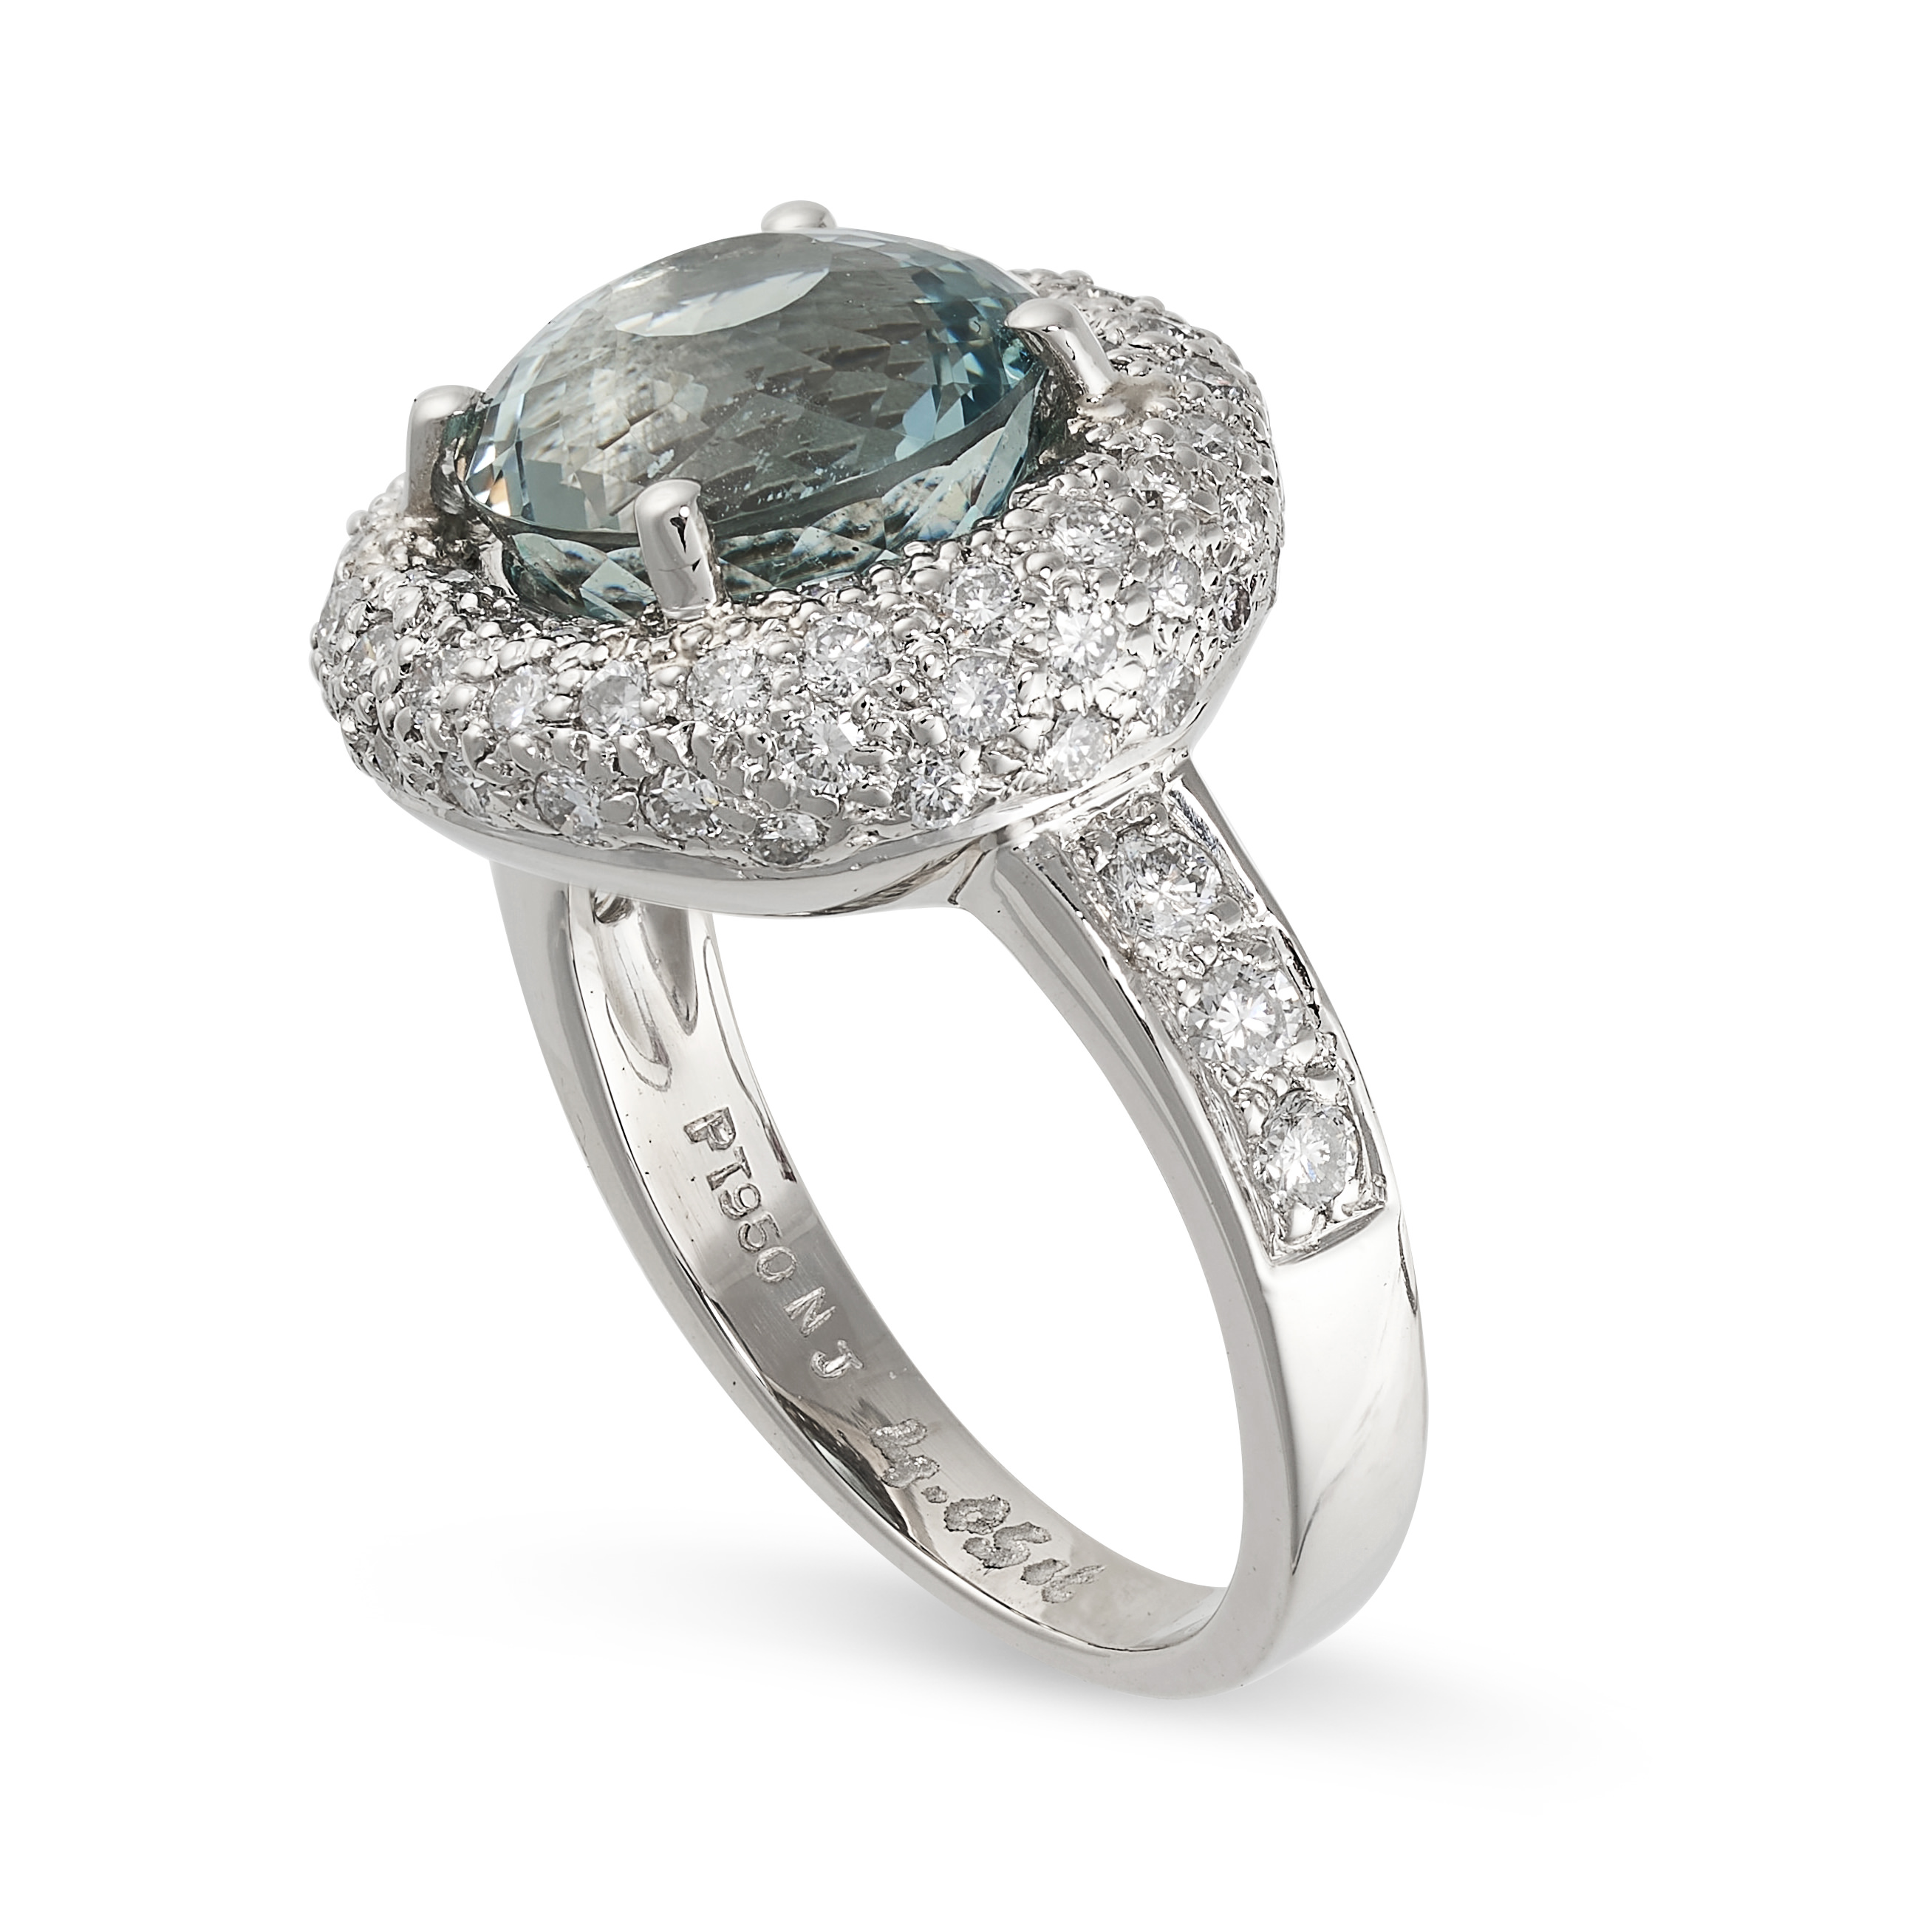 AN AQUAMARINE AND DIAMOND RING in platinum, set with a round cut aquamarine of 4.05 carats in a - Image 2 of 2